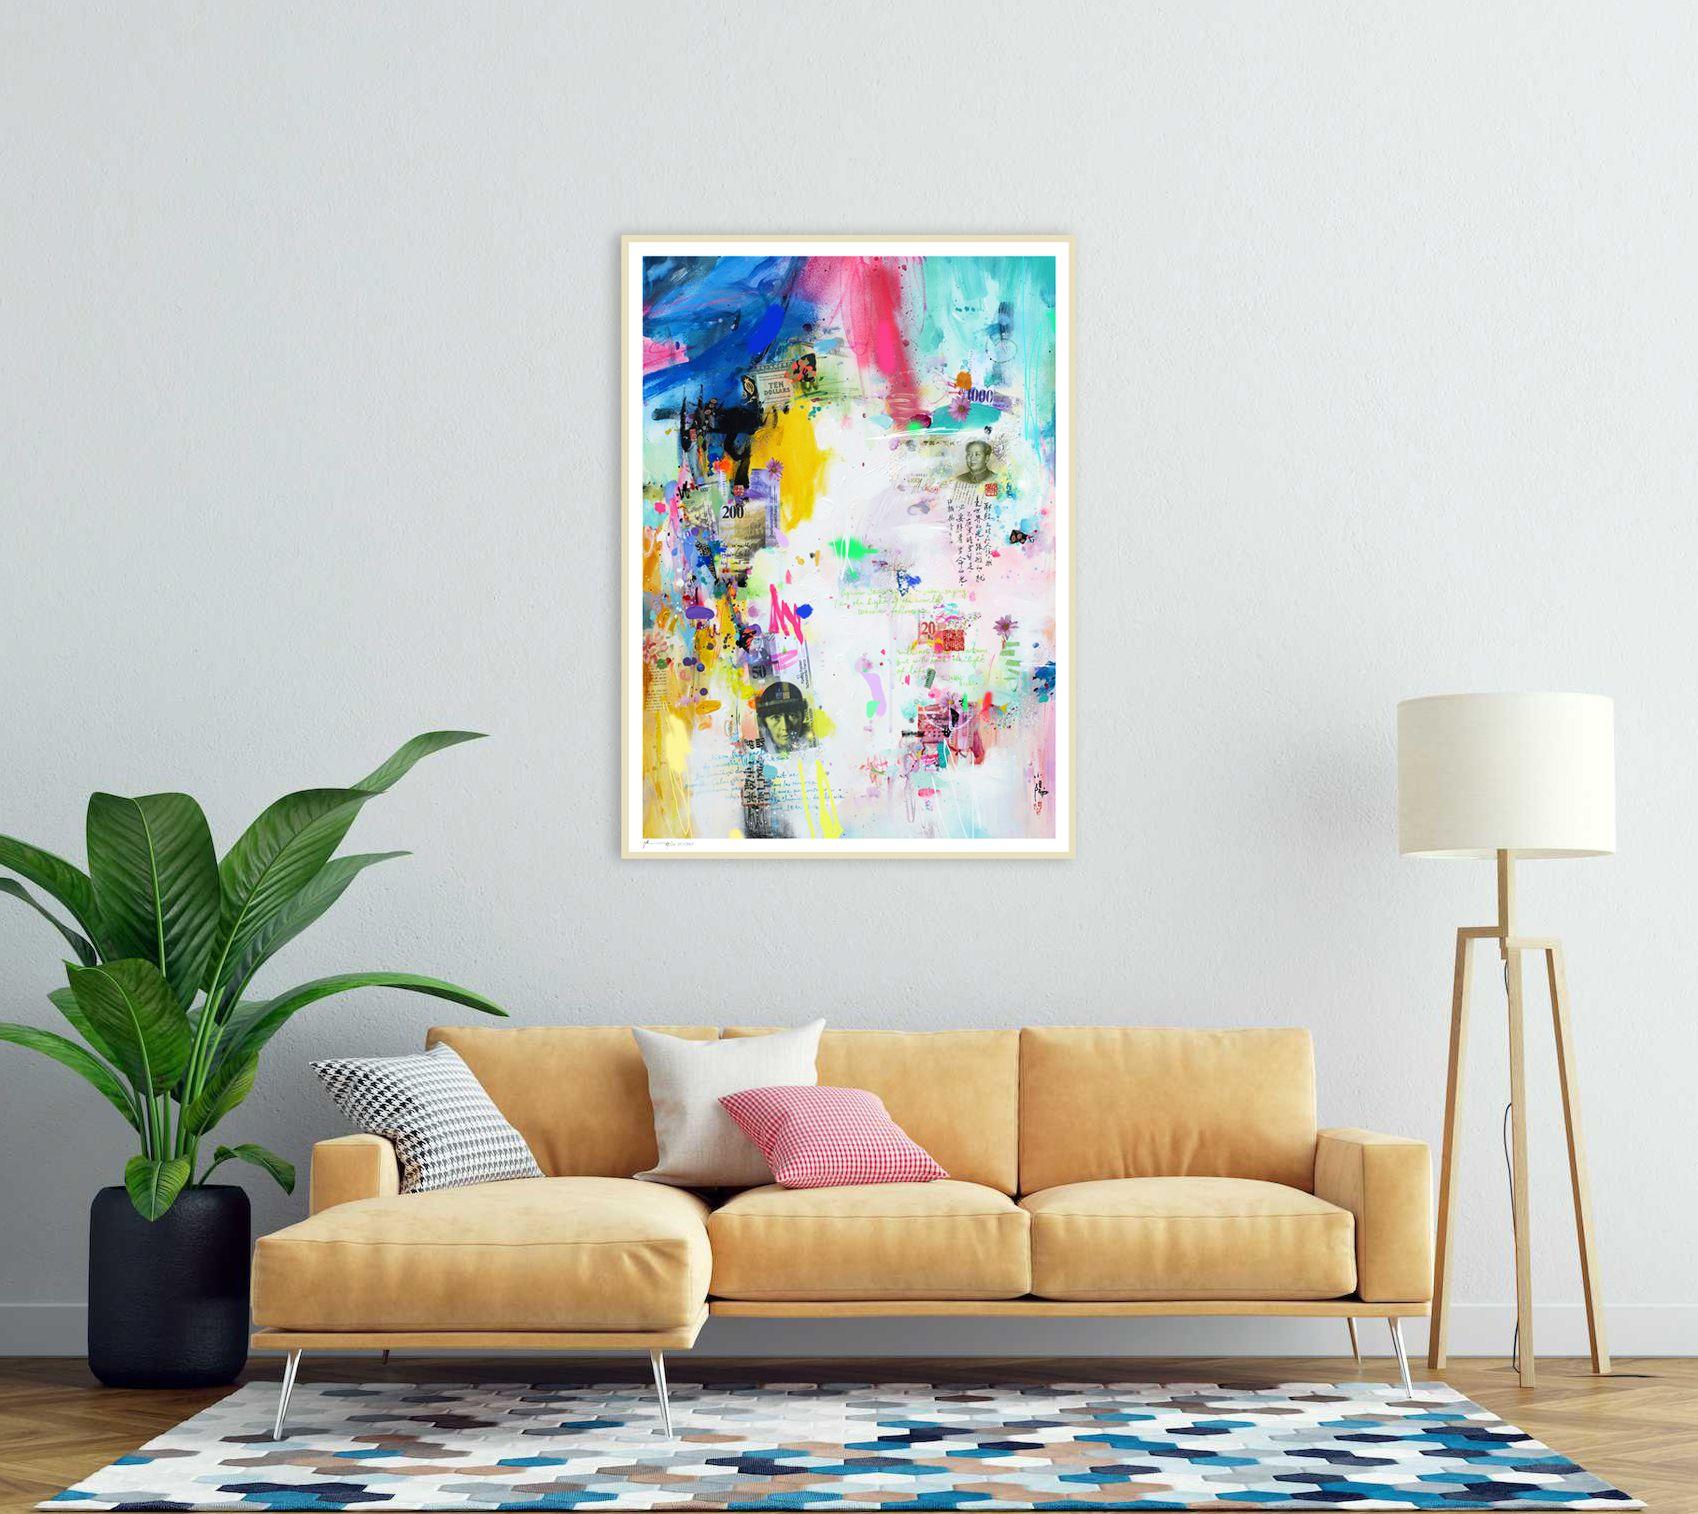 Money world - GiclÃe print on paper, Digital on Paper - Abstract Print by Xiaoyang Galas